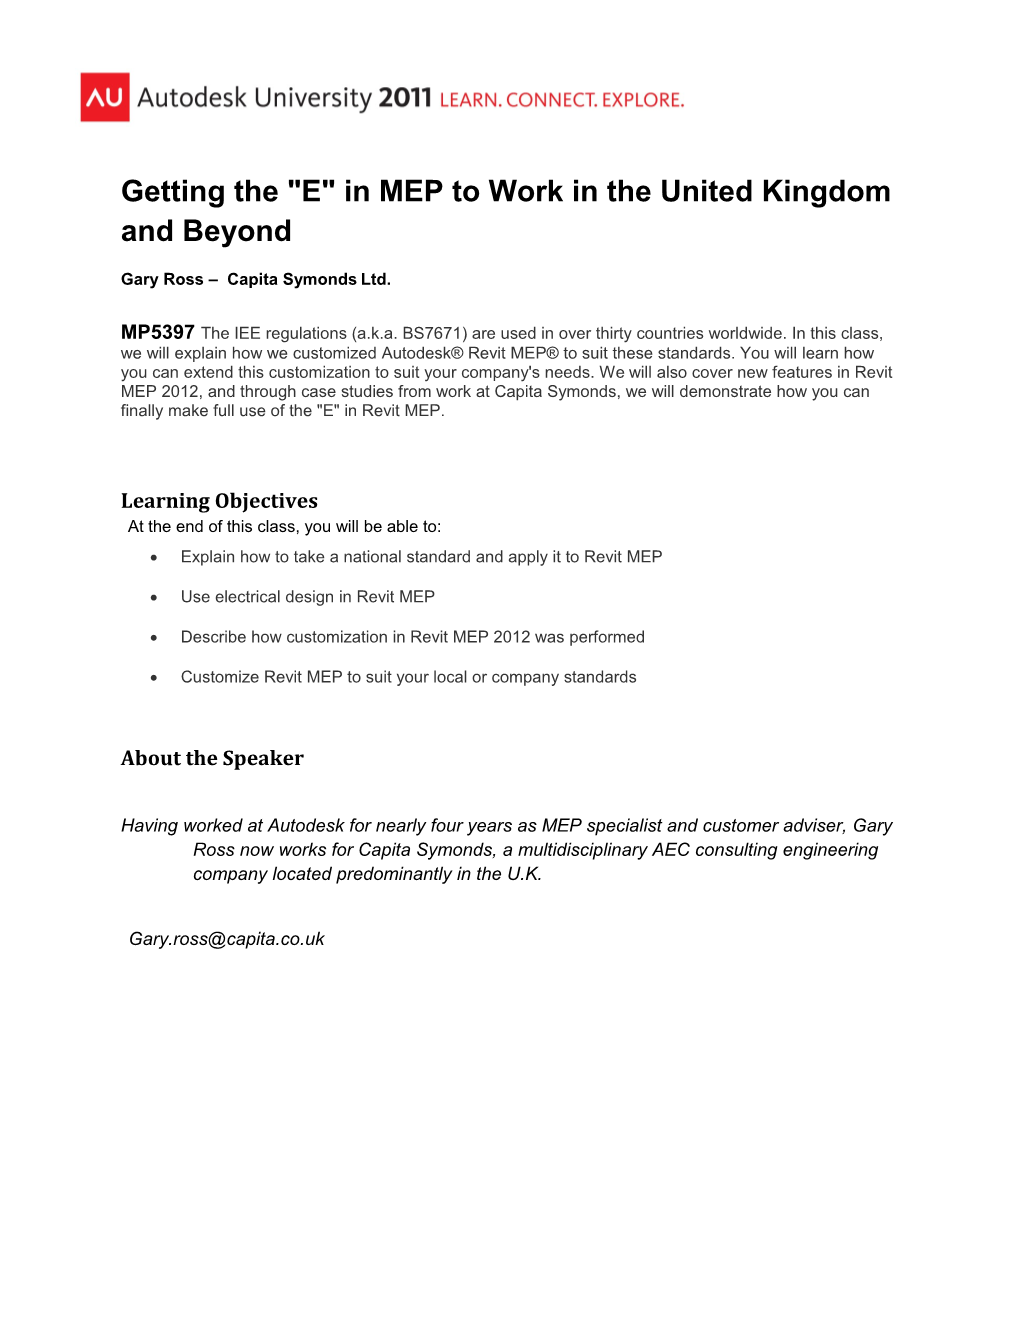 Getting the E in MEP to Work in the United Kingdom and Beyond